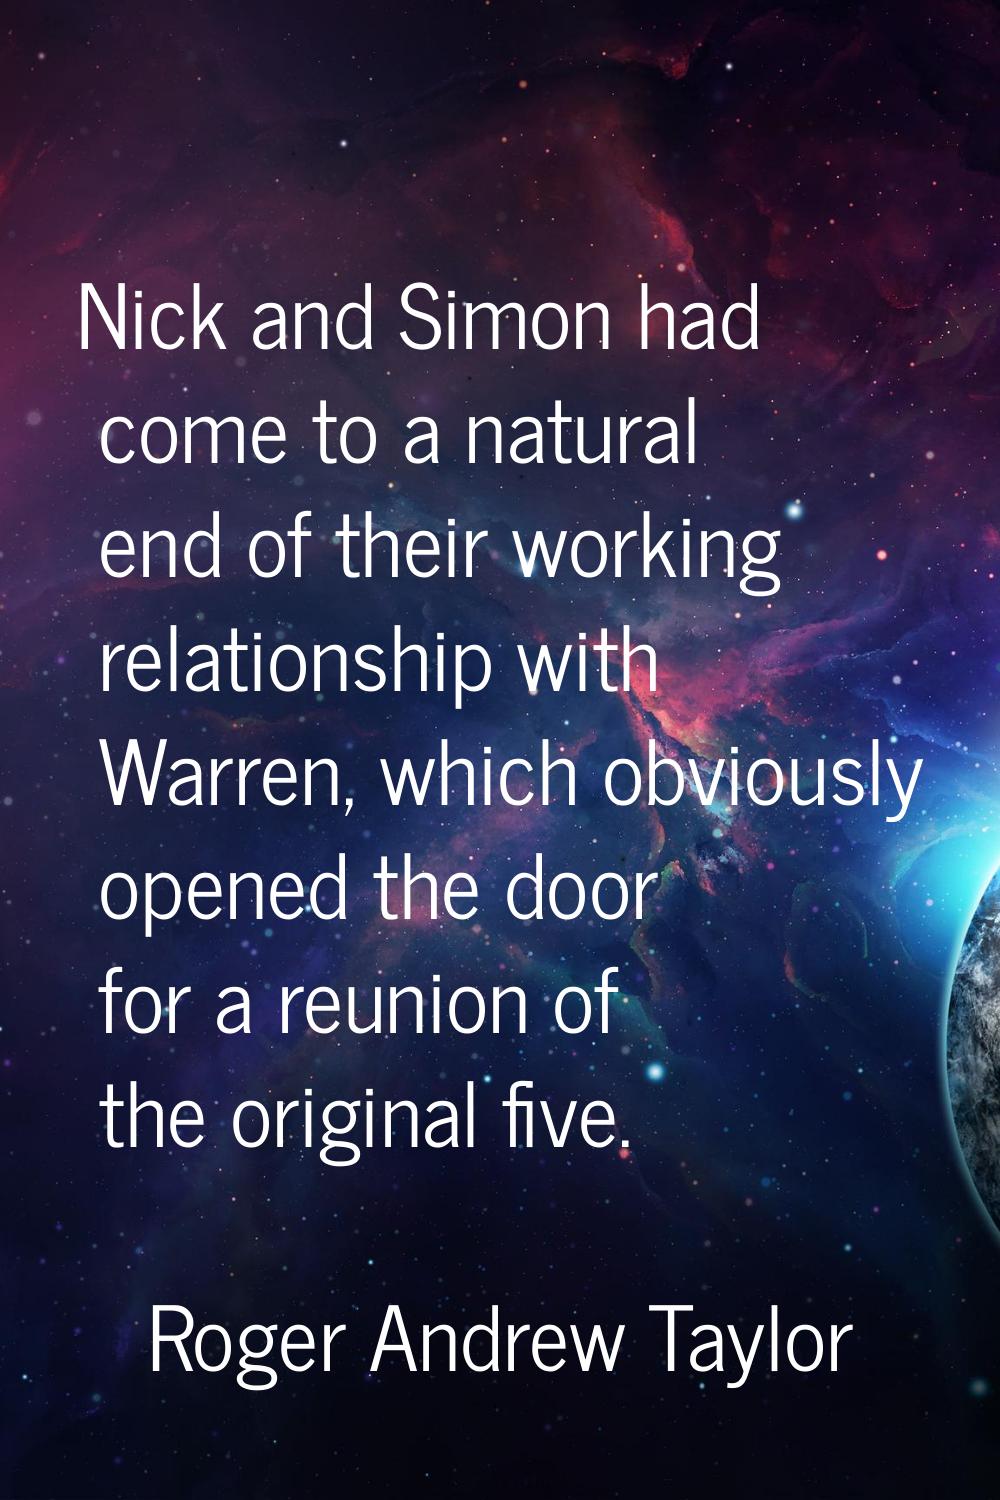 Nick and Simon had come to a natural end of their working relationship with Warren, which obviously